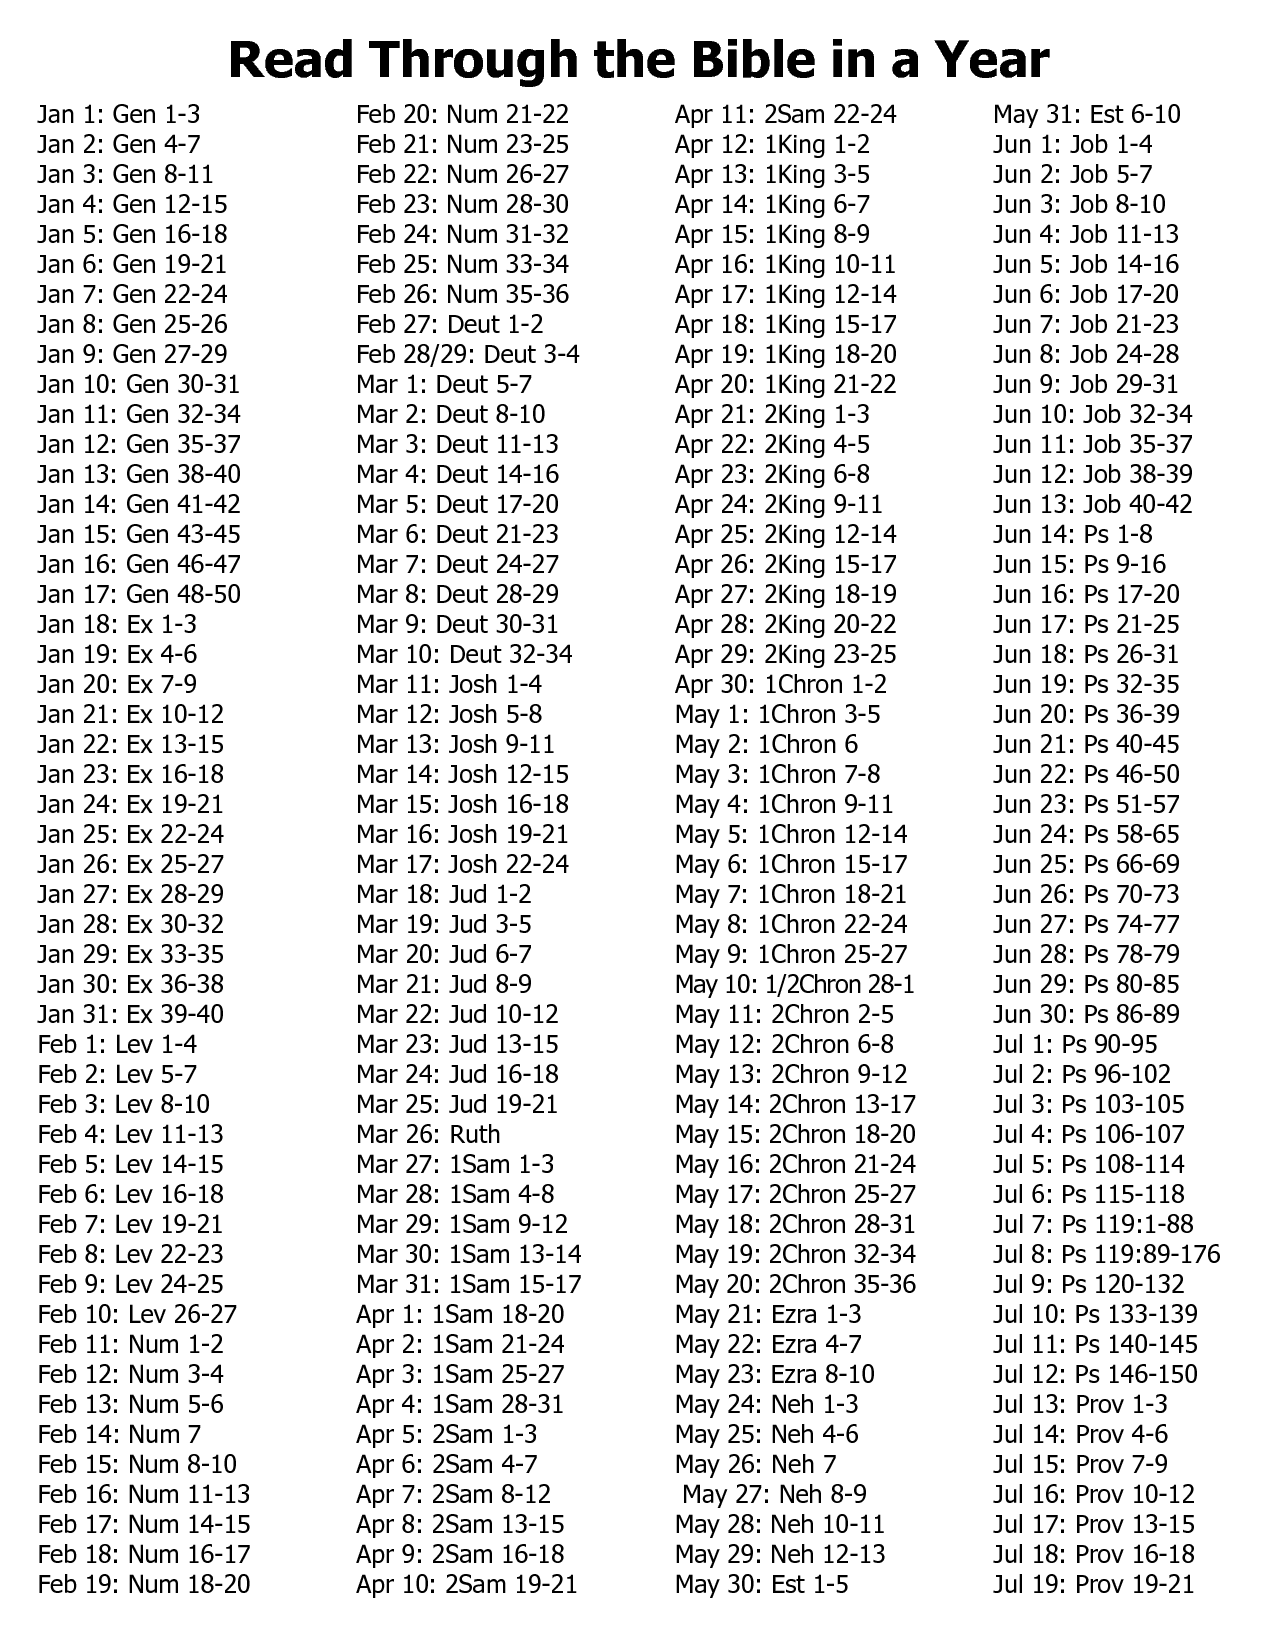 Printable Schedule To Read The Bible In A Year